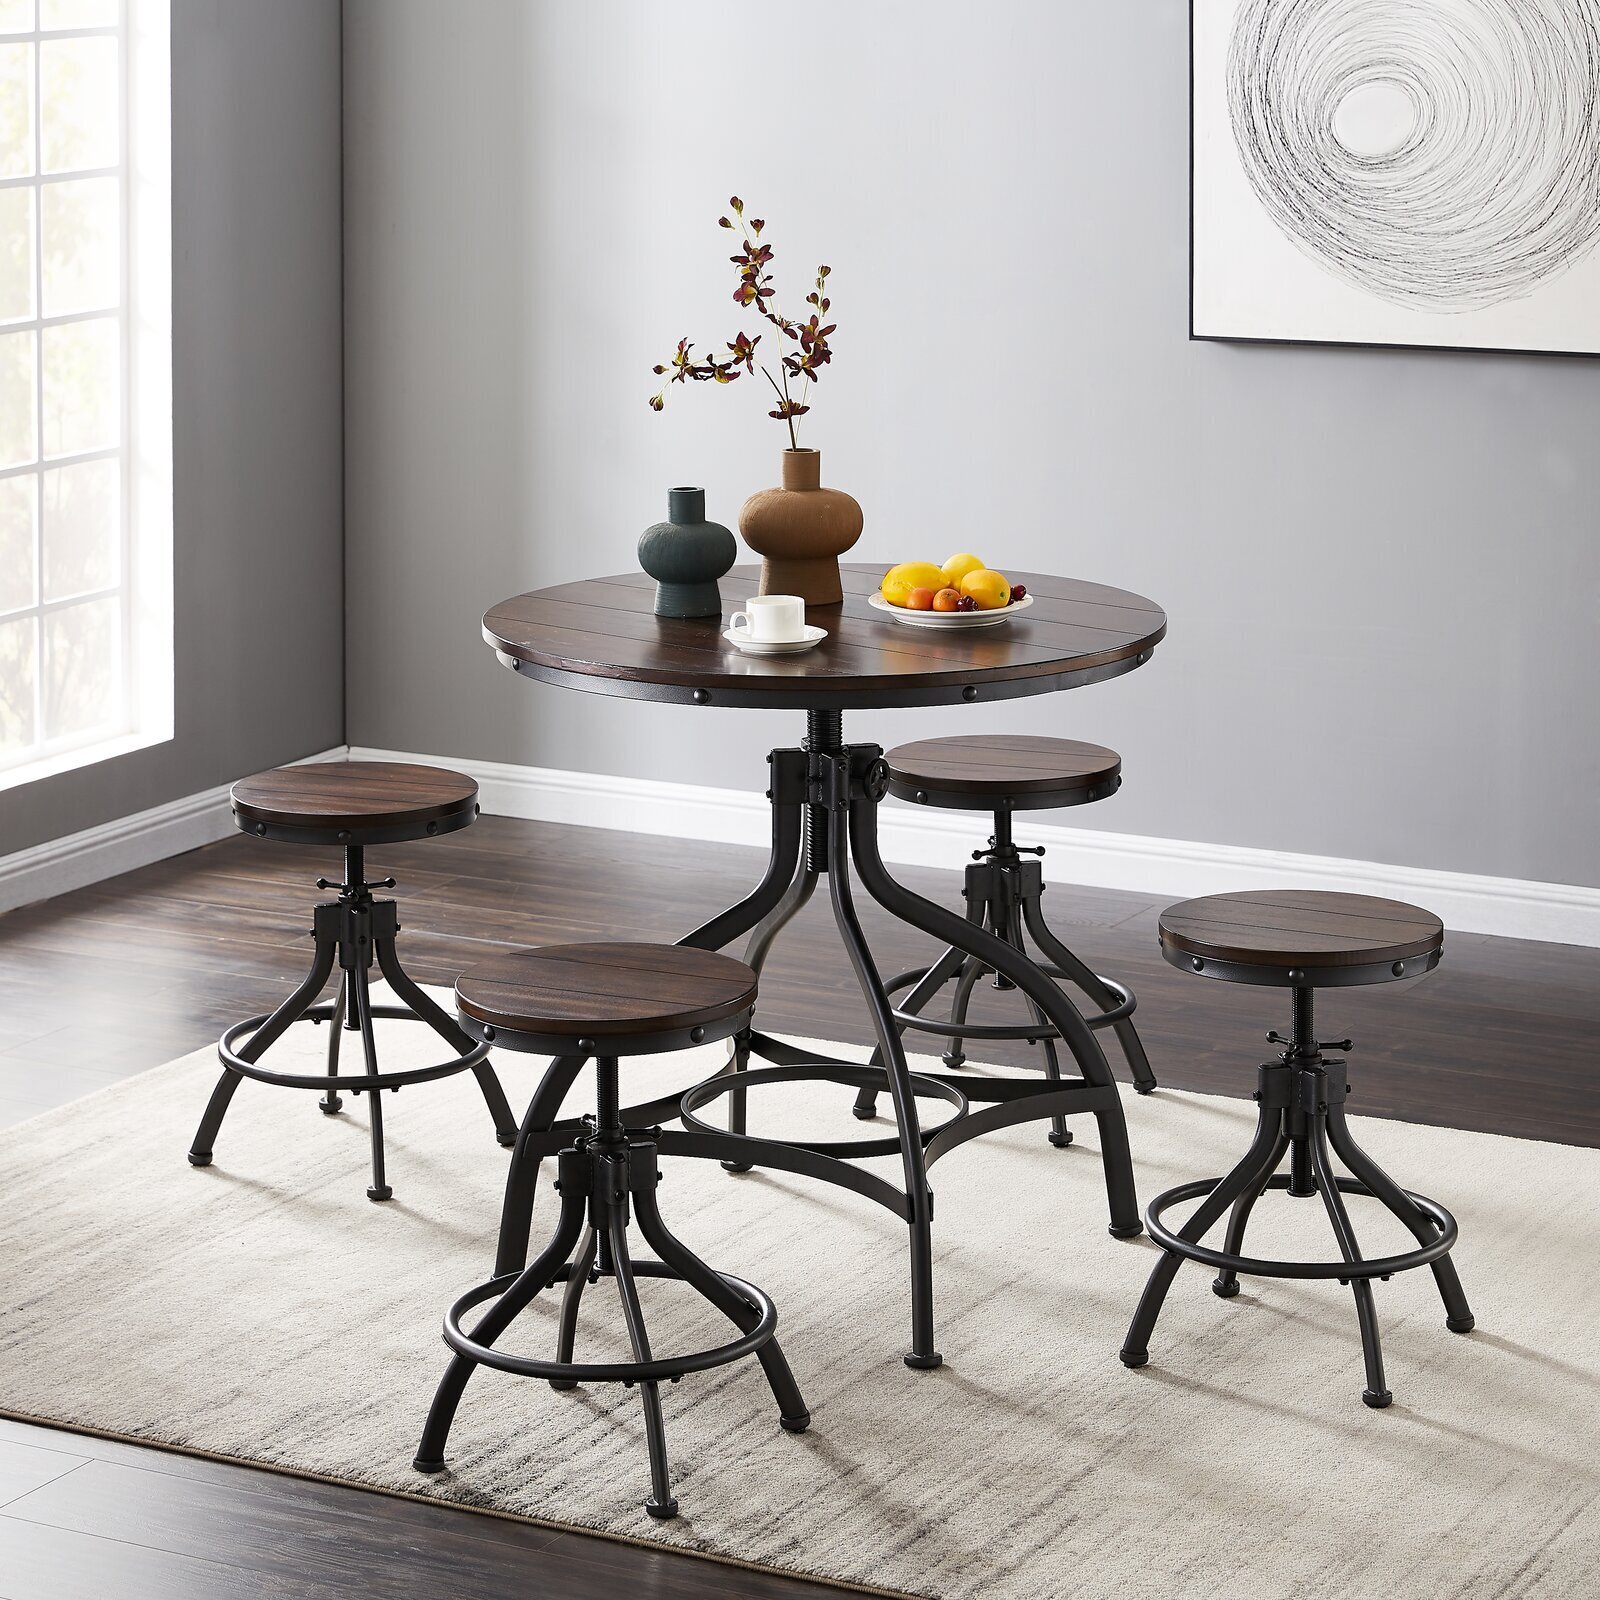 Dining Set with Industrial Appeal